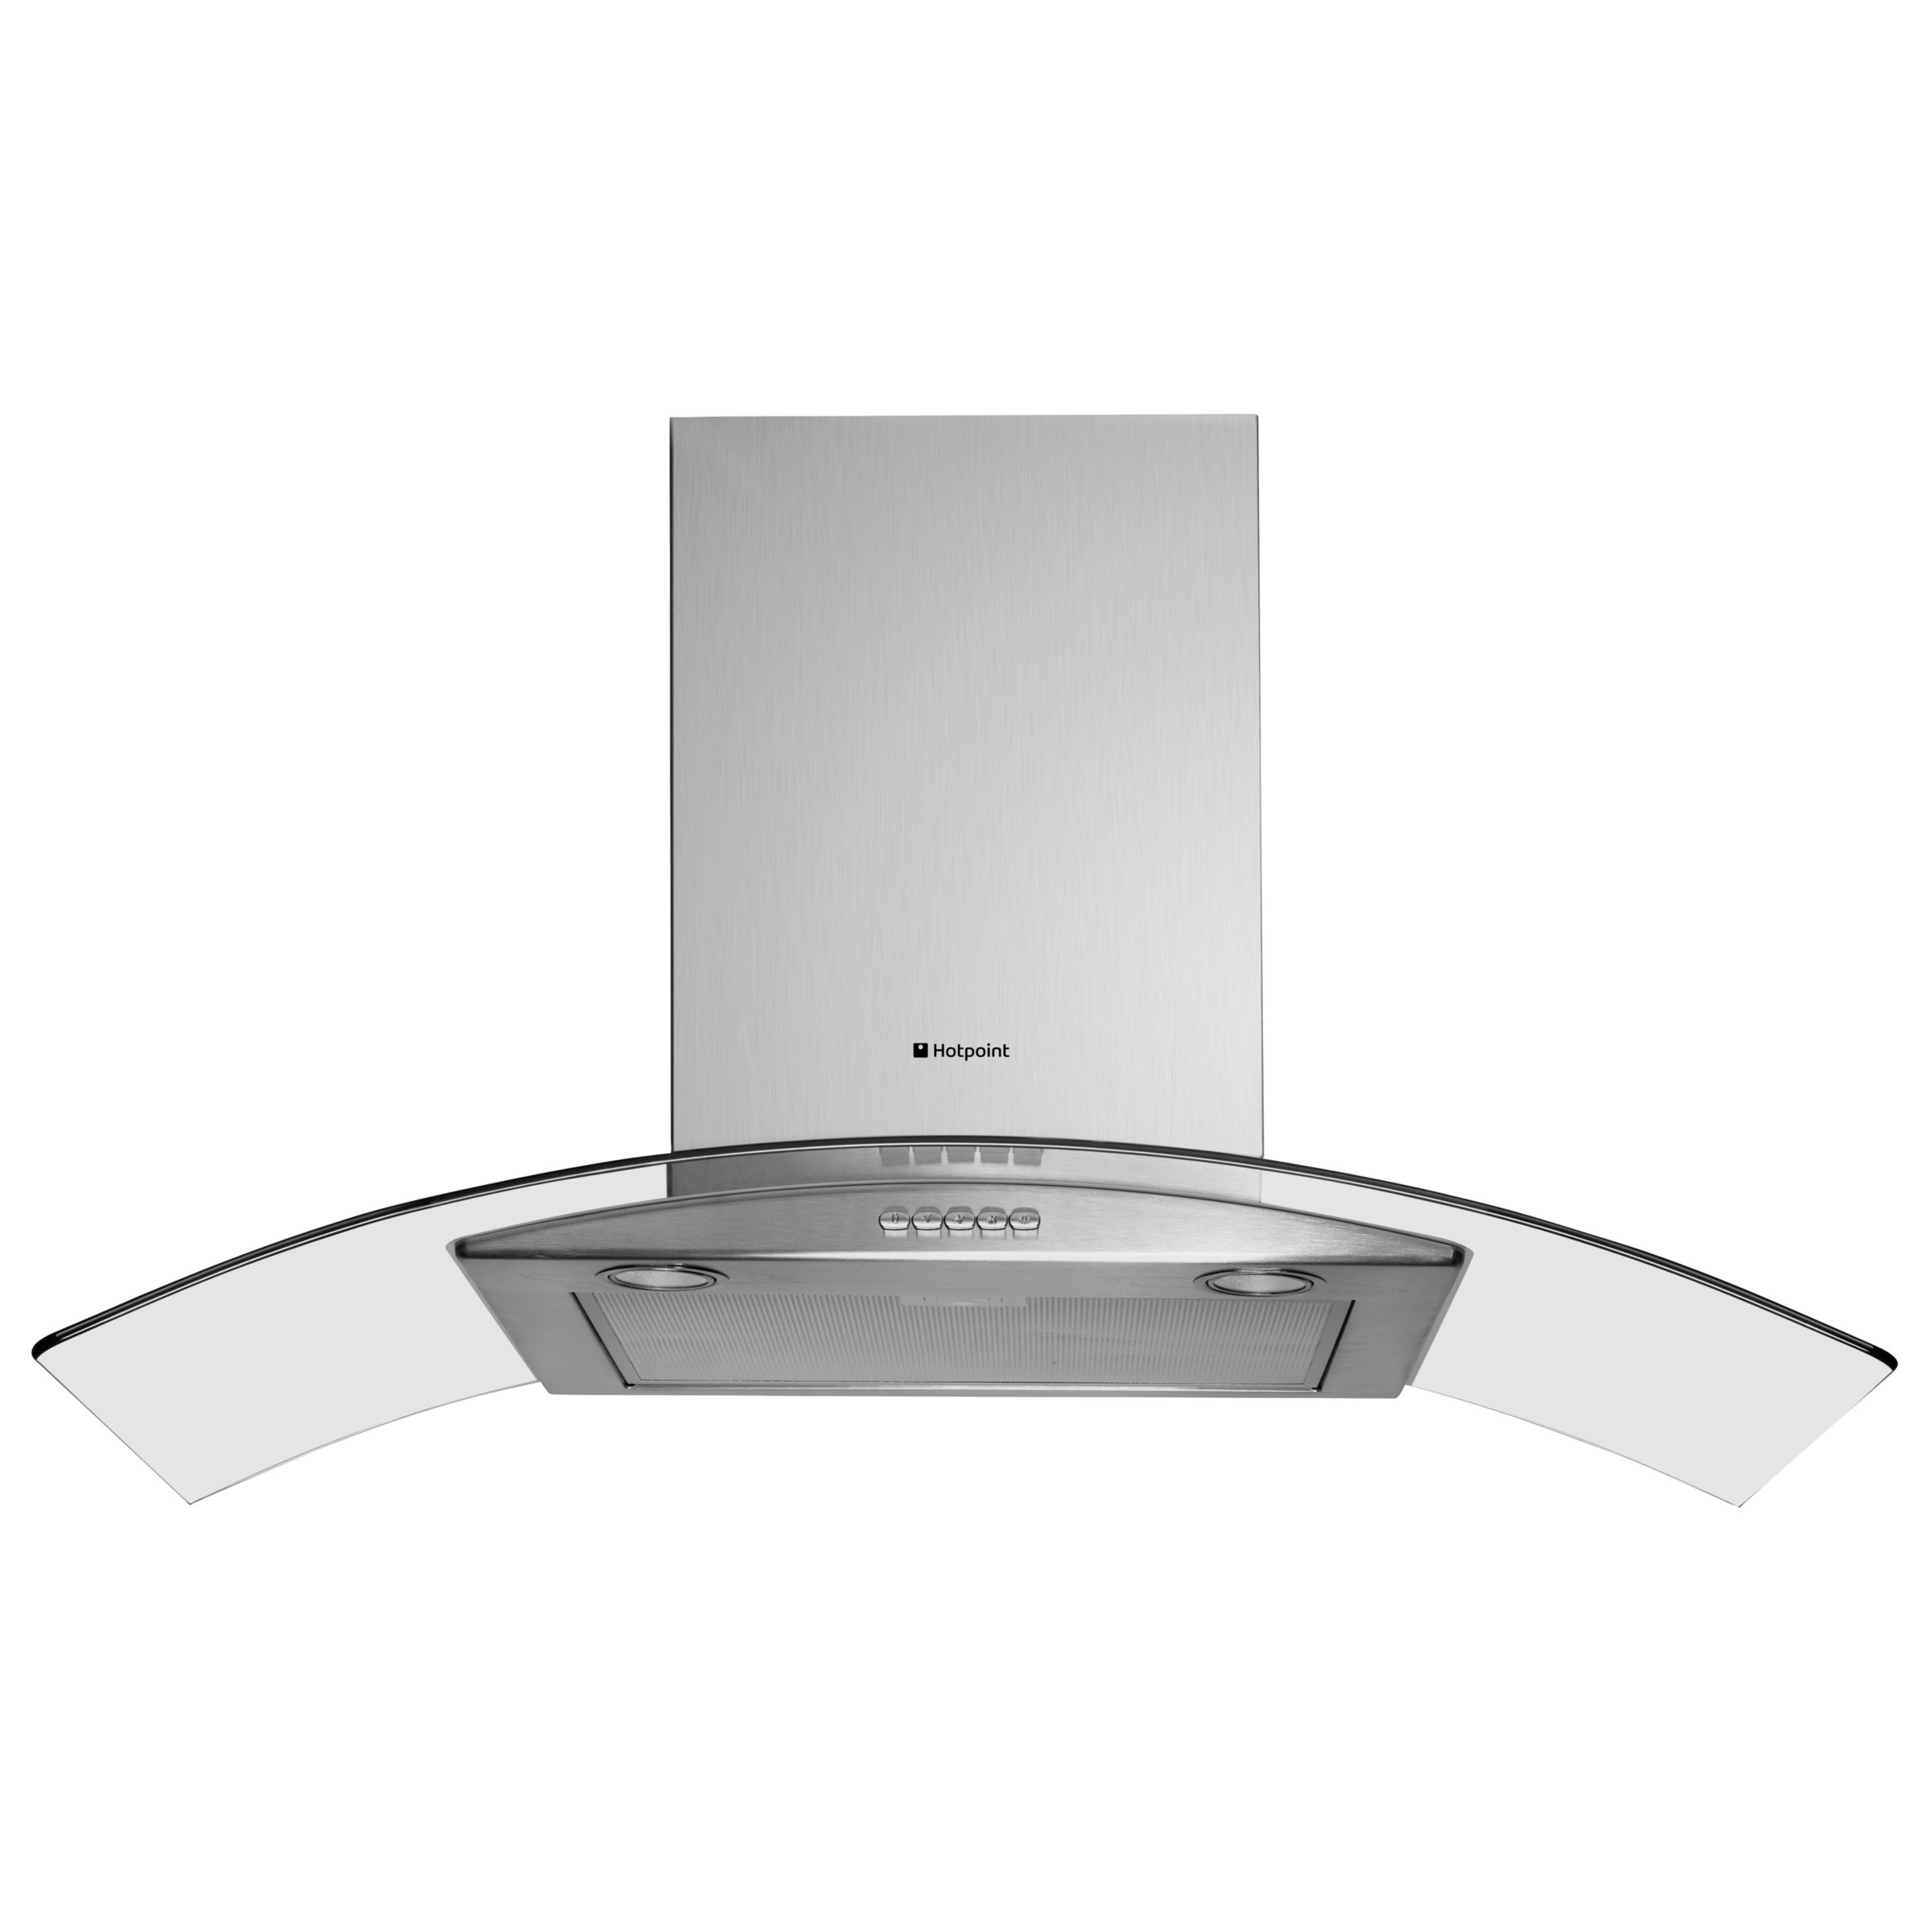 Hotpoint HTC9T Chimney Hood, Stainless Steel at John Lewis